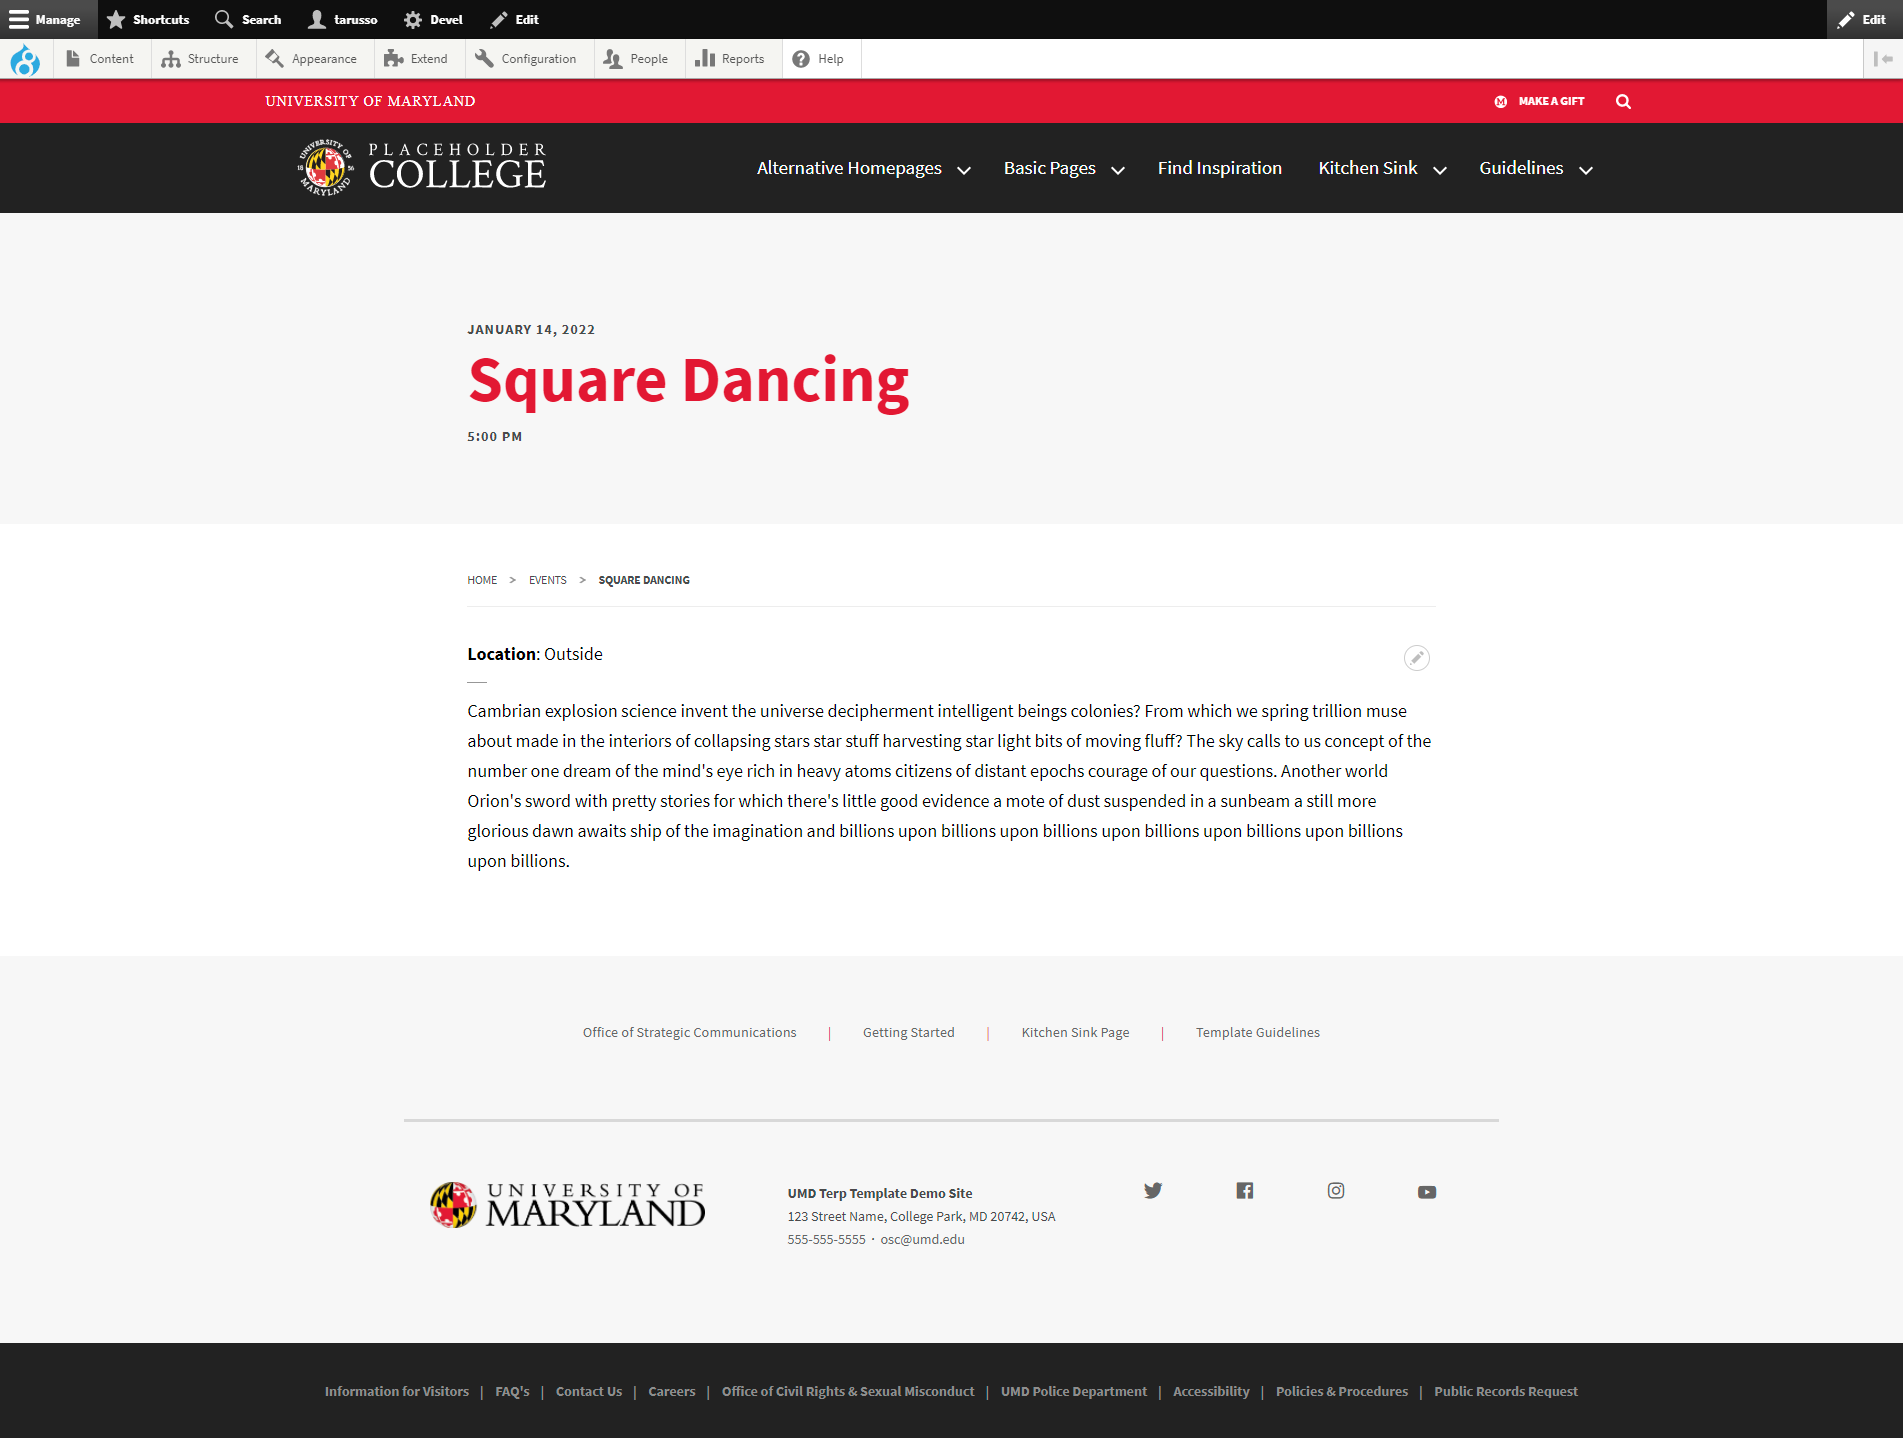 Screenshot of Square Dancing event page